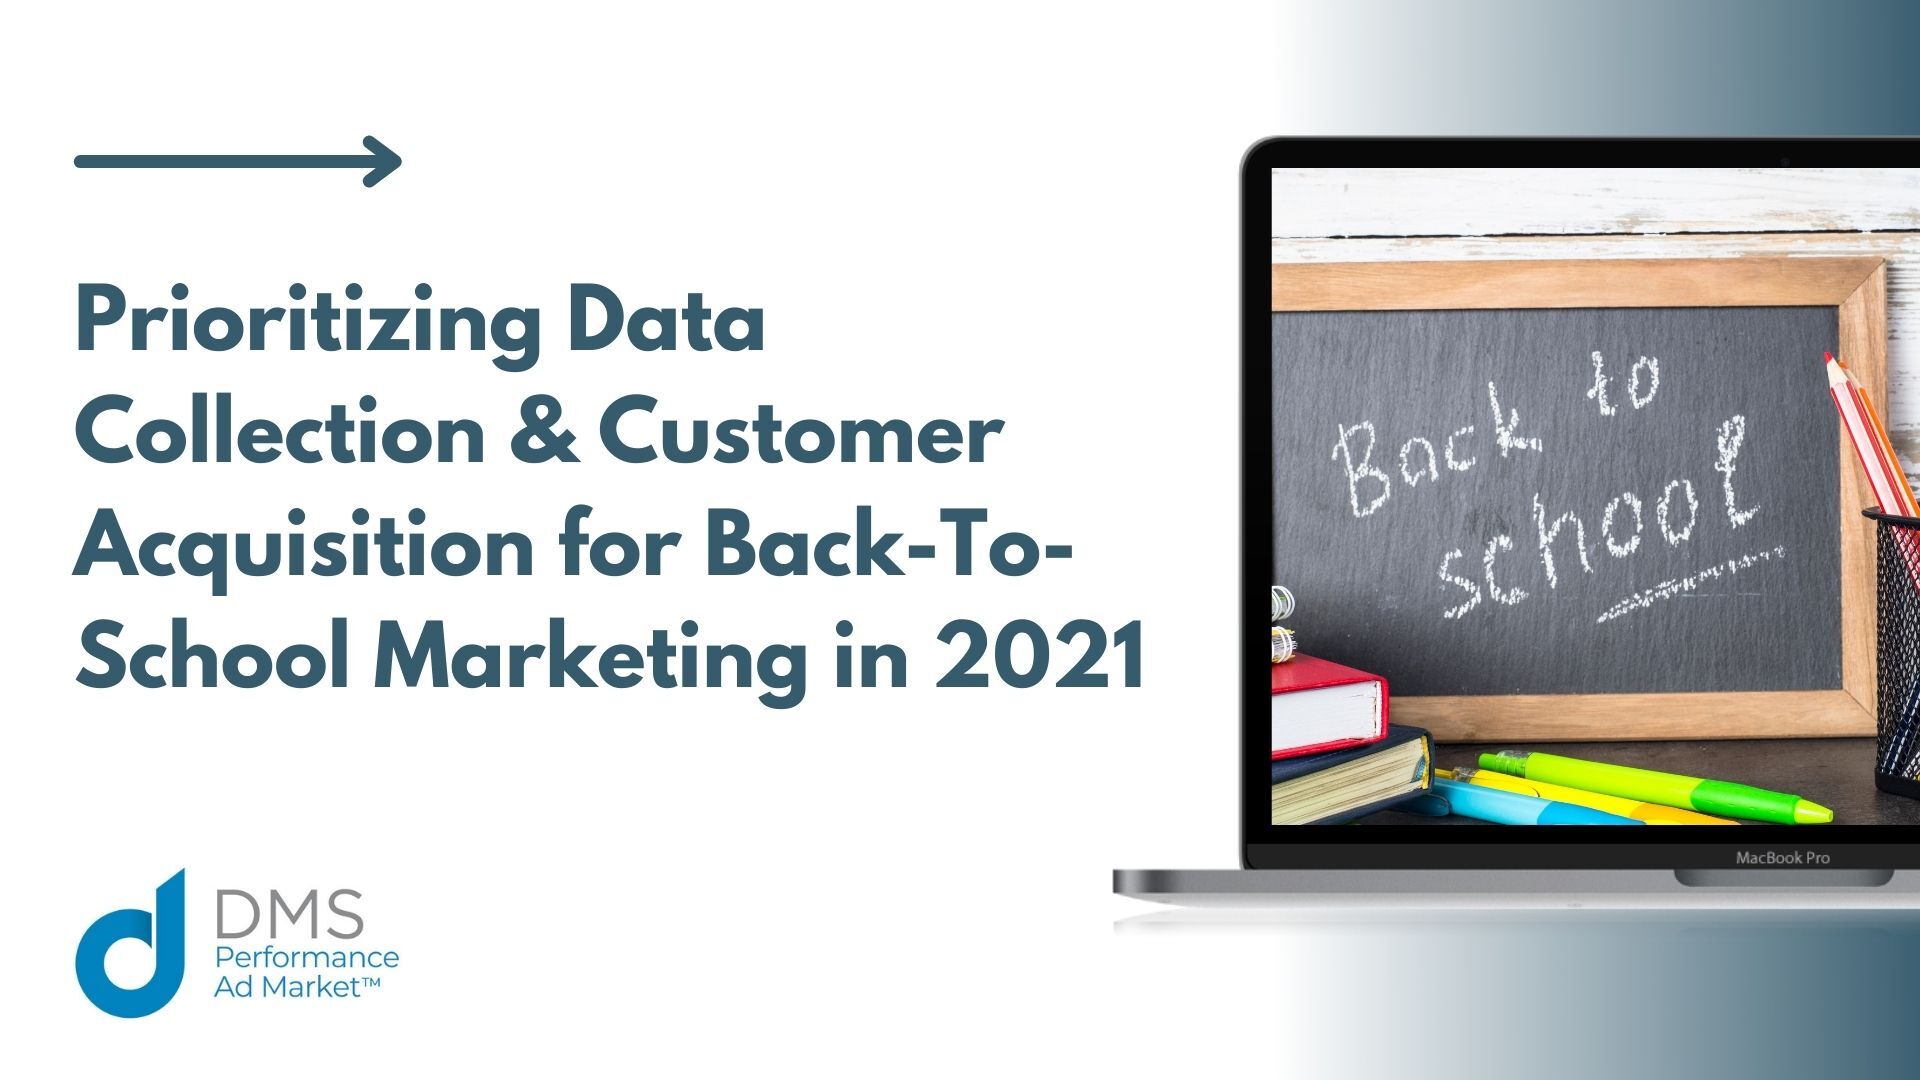 back-to-school marketing dms blog featured